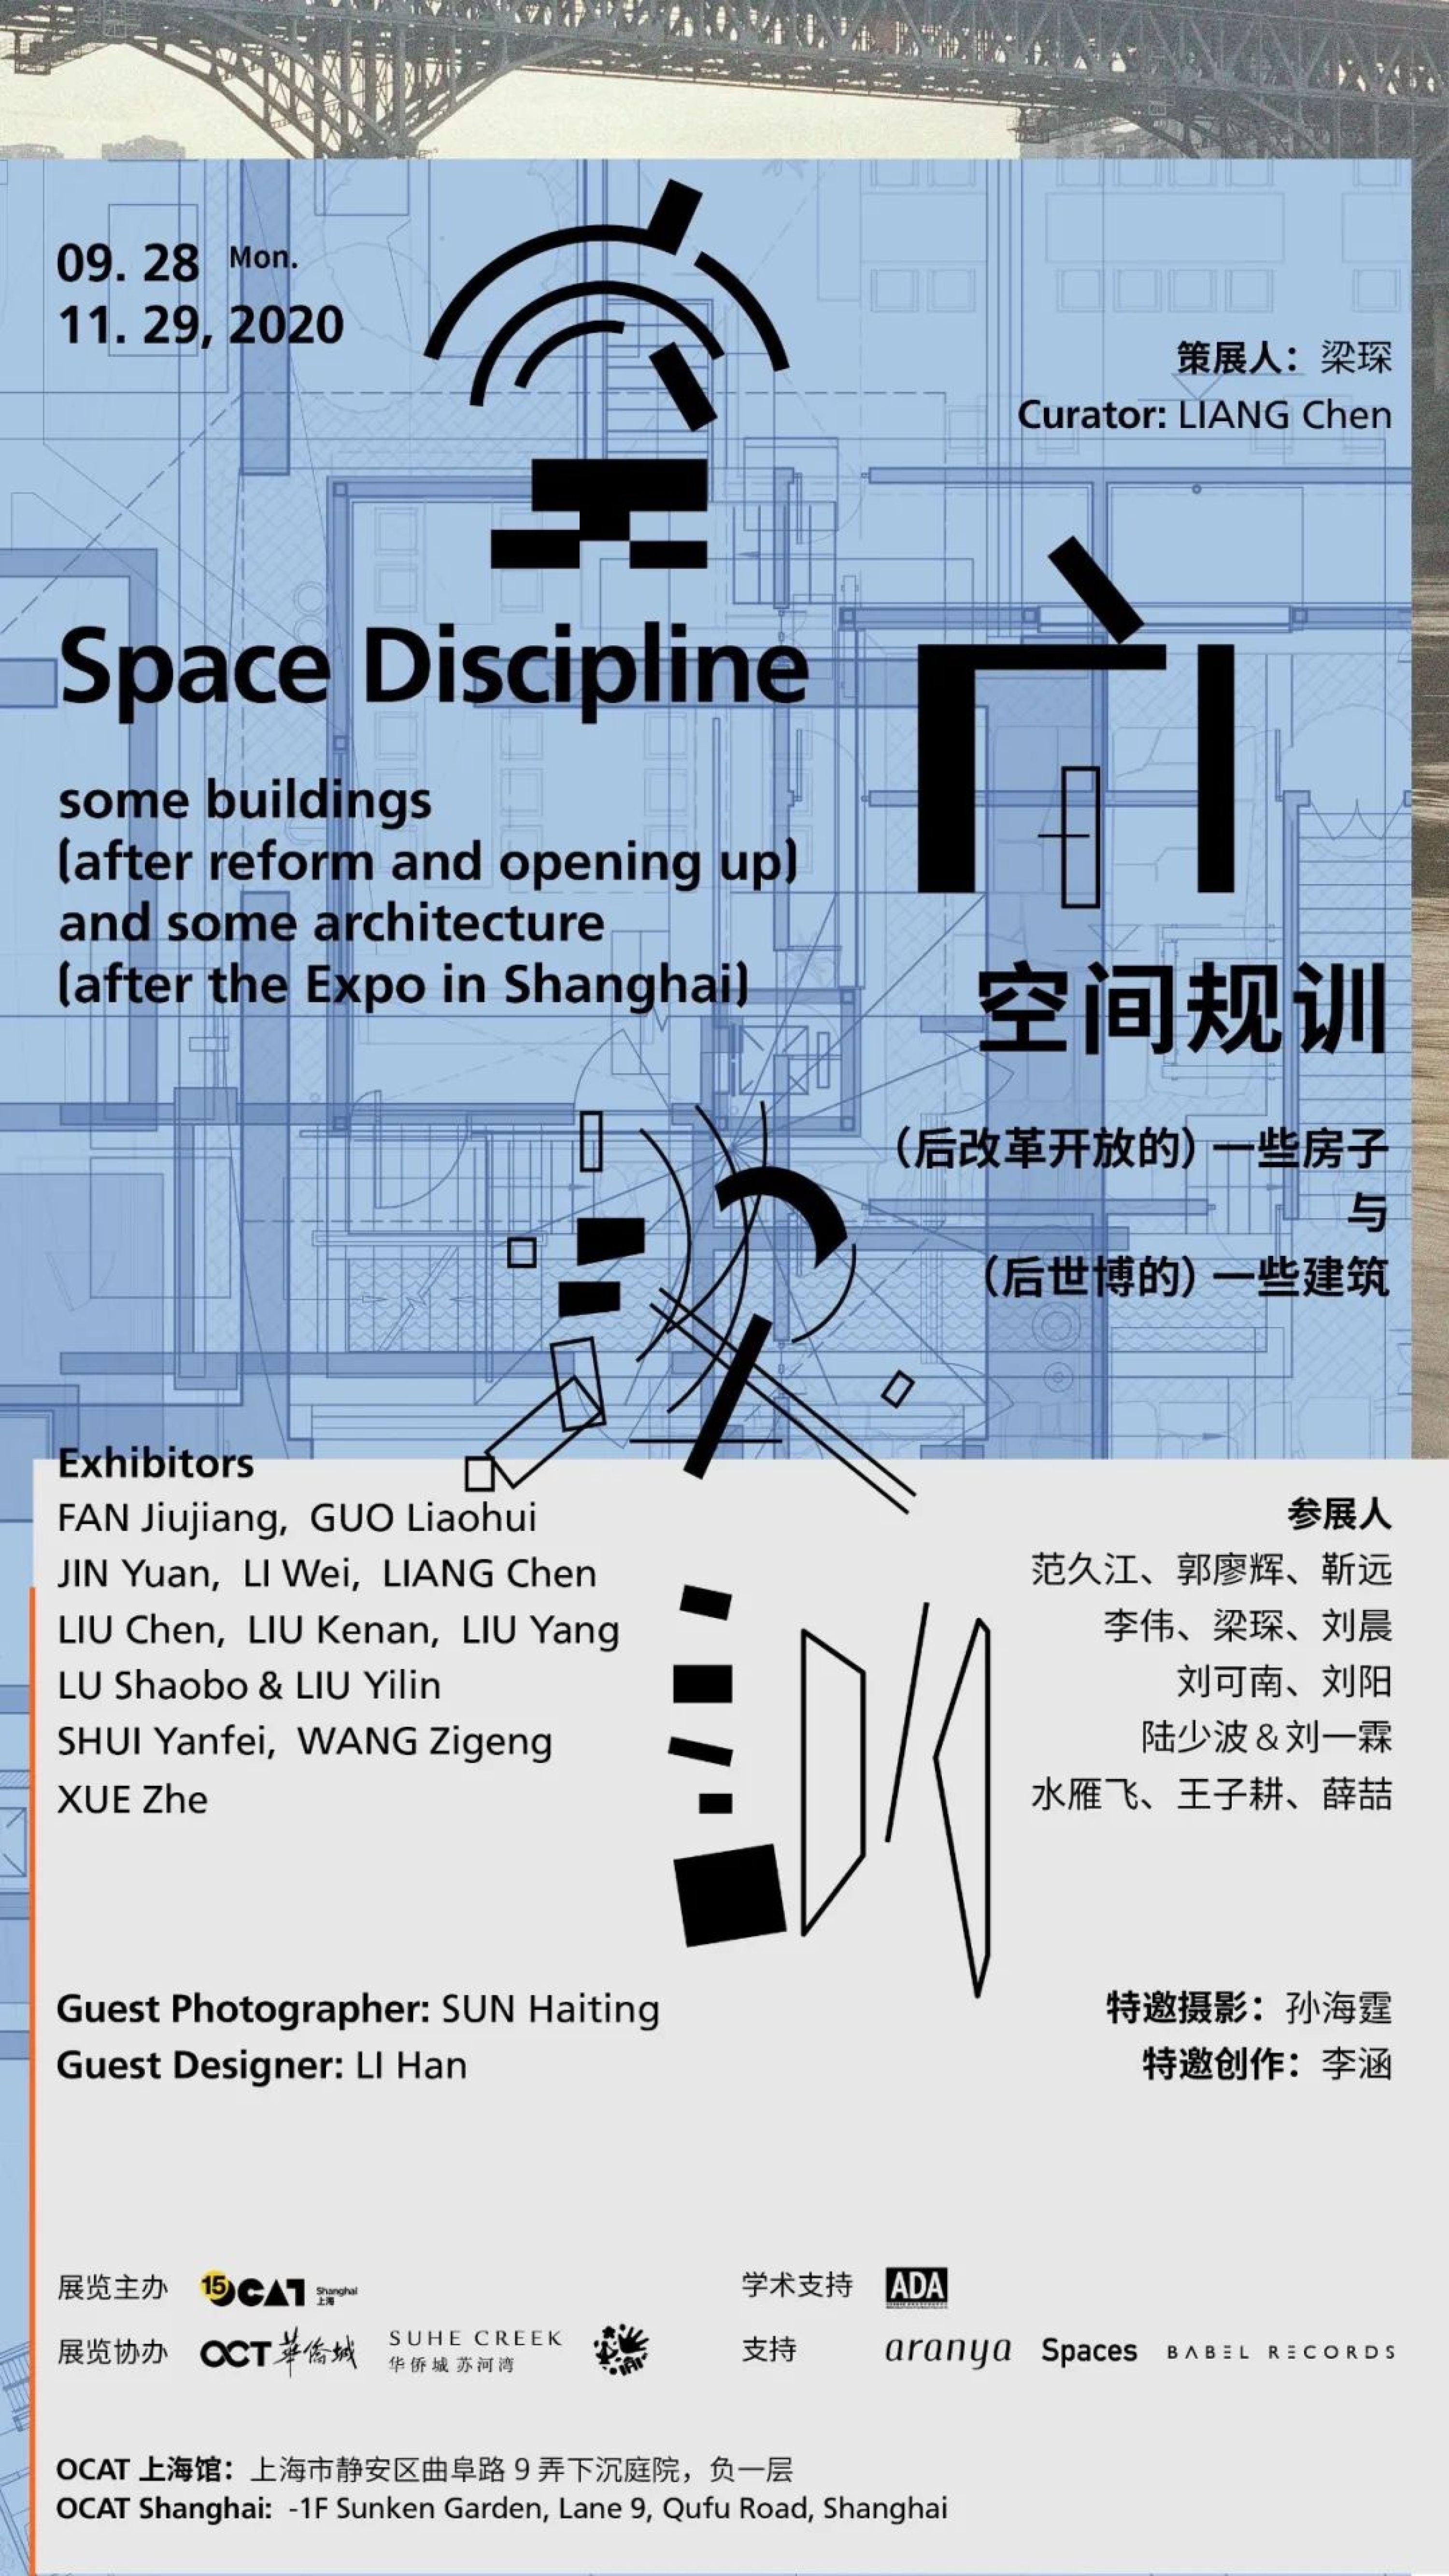 Zigeng Wang was Invited to Exhibit “1994" (Prototype) and Attend the Opening Forum of the Exhibition “Space Discipline" at  OCAT Shanghai